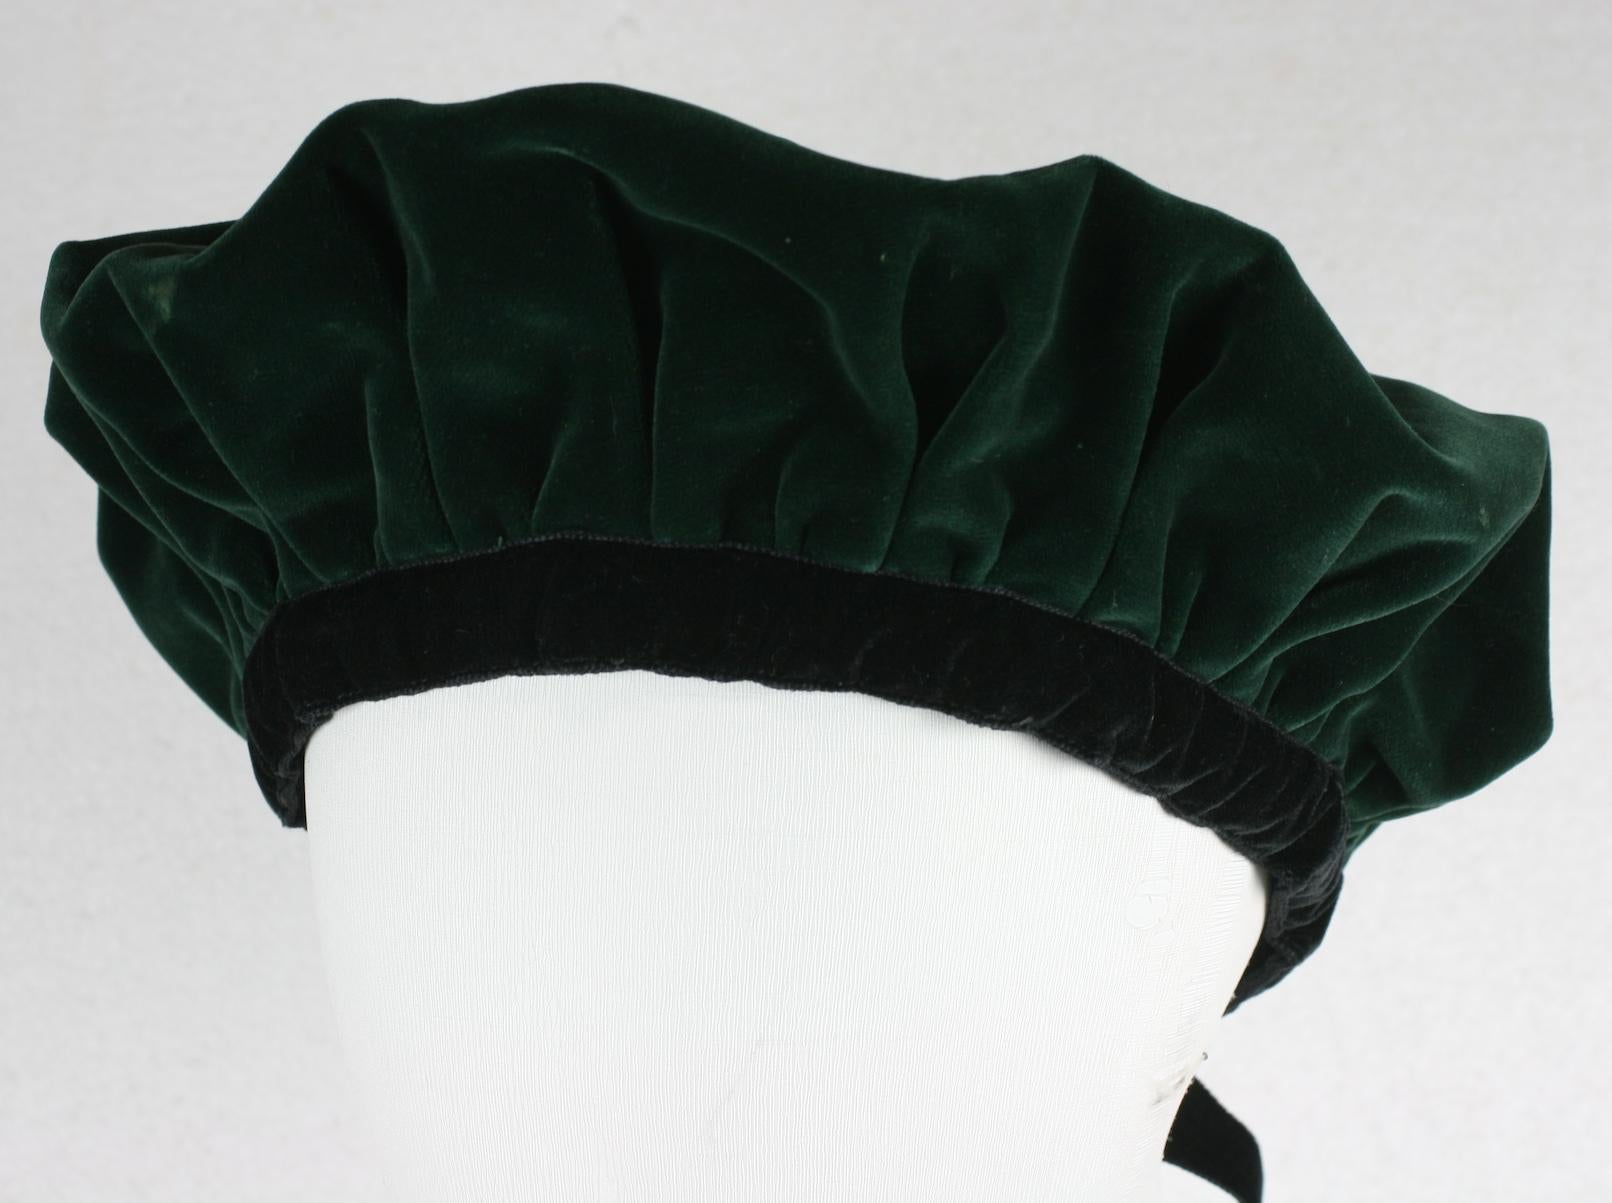 Iconic Yves Saint Laurent Deep Green Cotton Velvet Rive Gauche Beret from the 1980's. Edged and tied in black grosgrain ribbon. YSL Rive Gauche. 1980's France. 
Interior Band measures 22